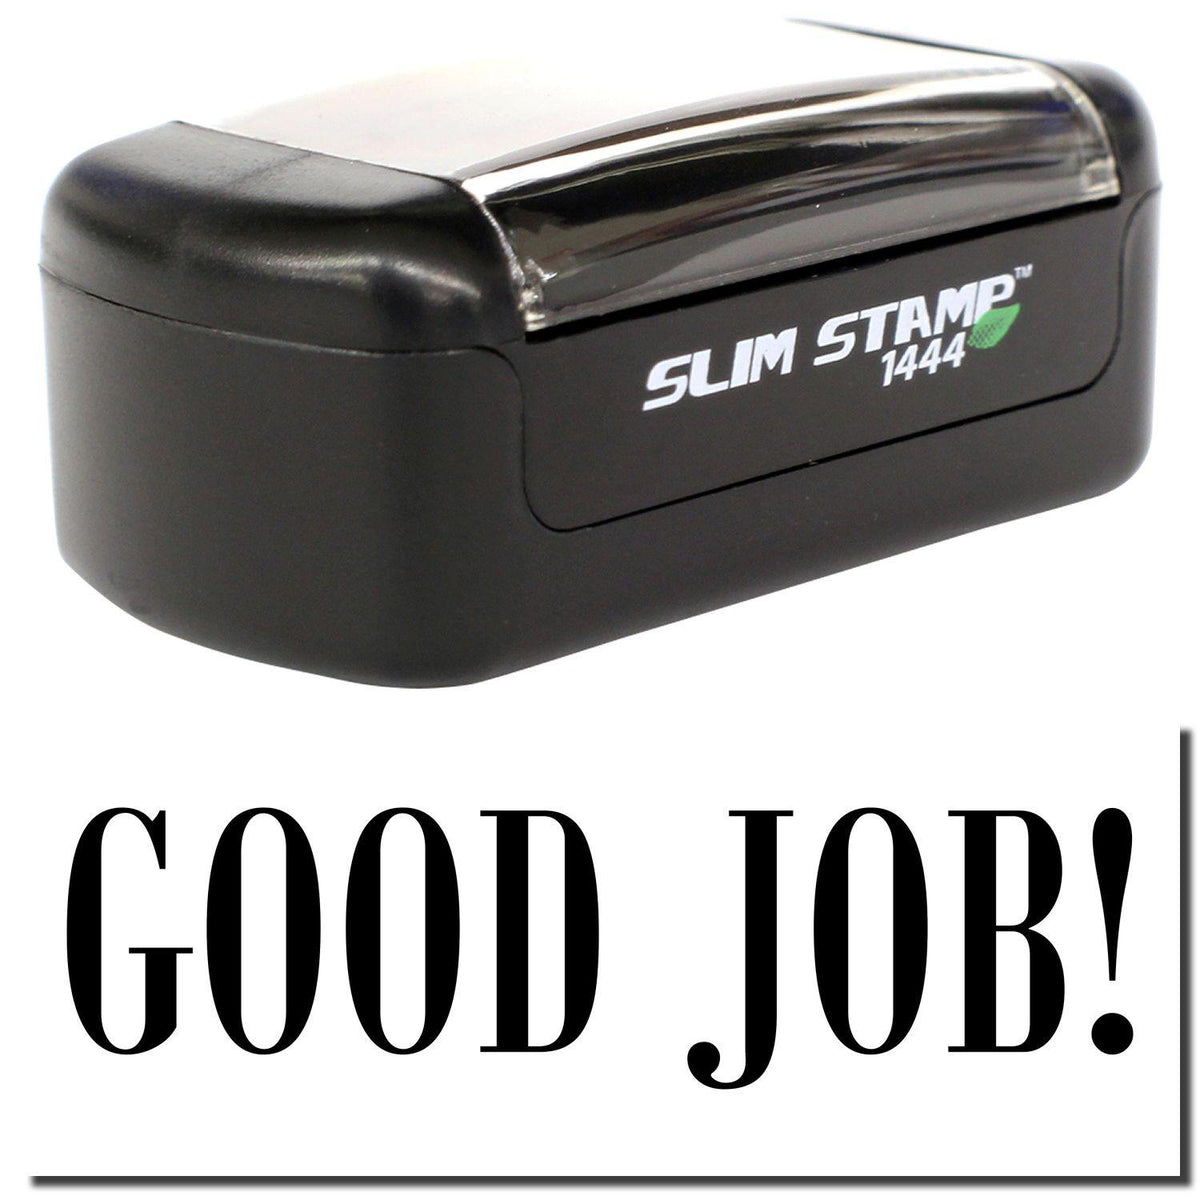 A stock office pre-inked stamp with a stamped image showing how the text &quot;GOOD JOB!&quot; is displayed after stamping.